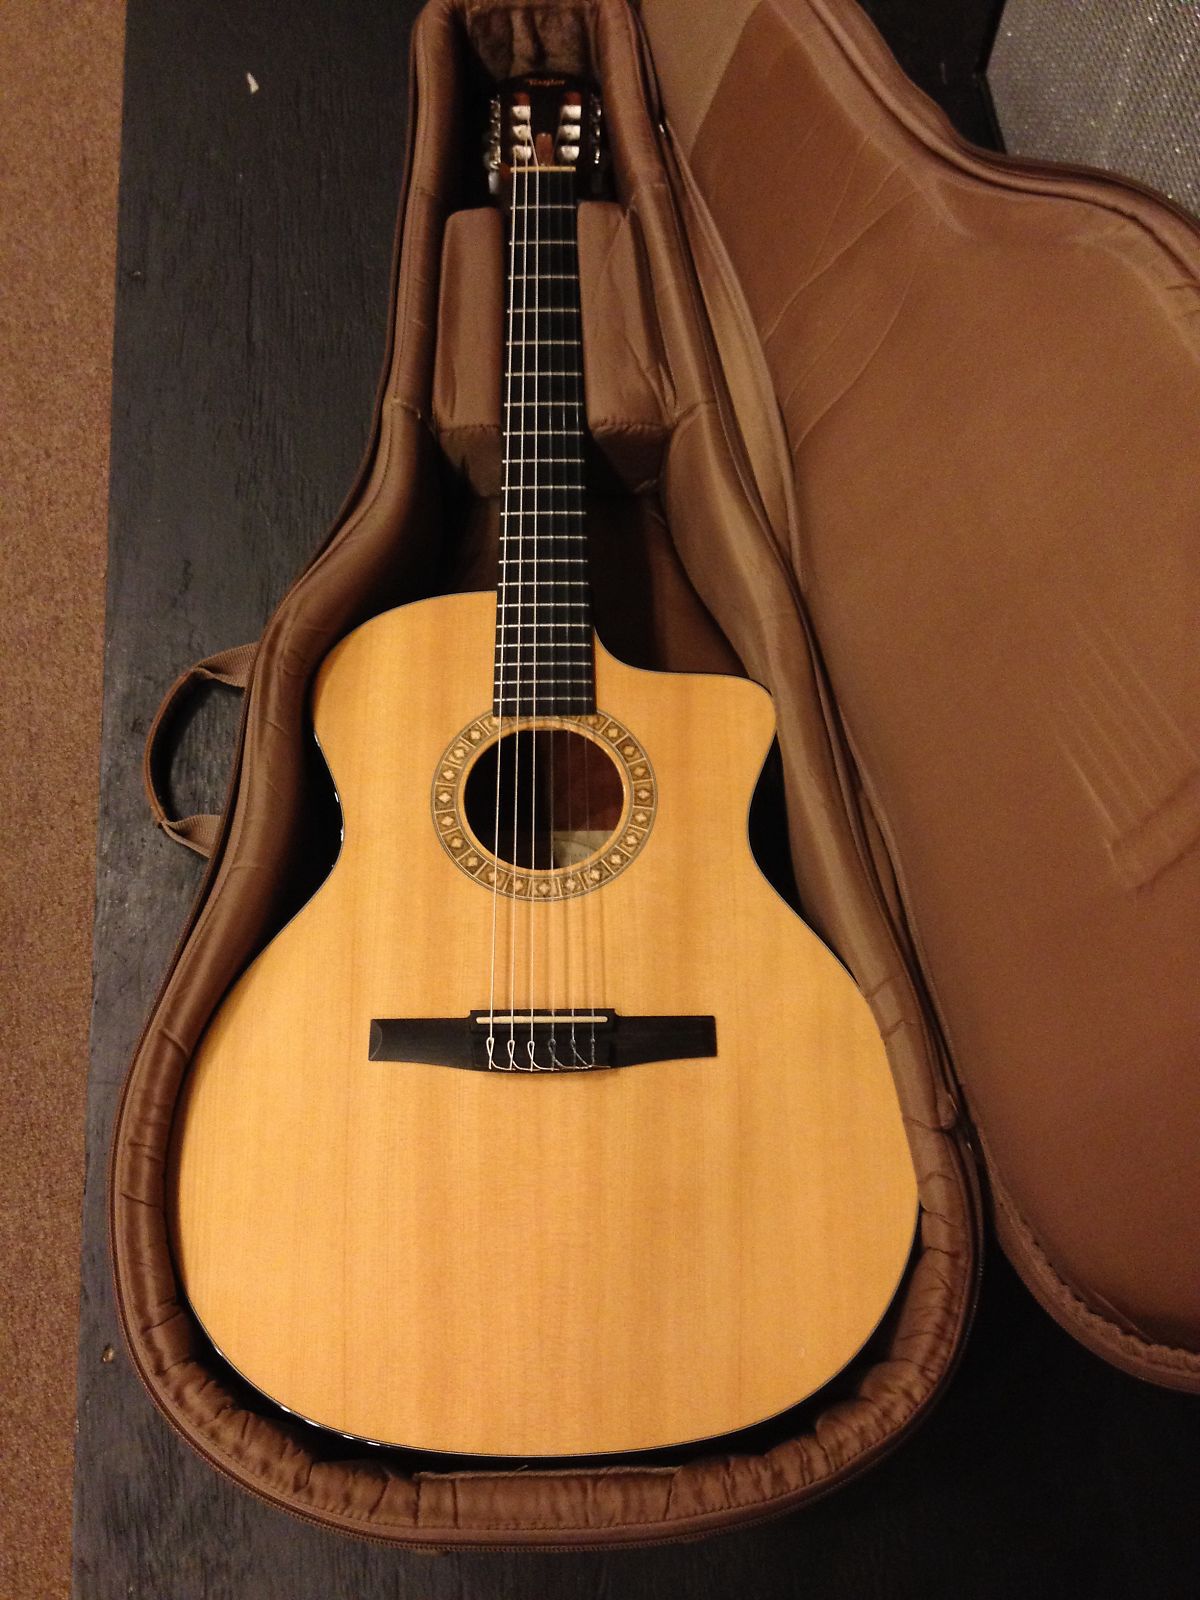 Taylor NS34ce with ES-N Electronics | Reverb